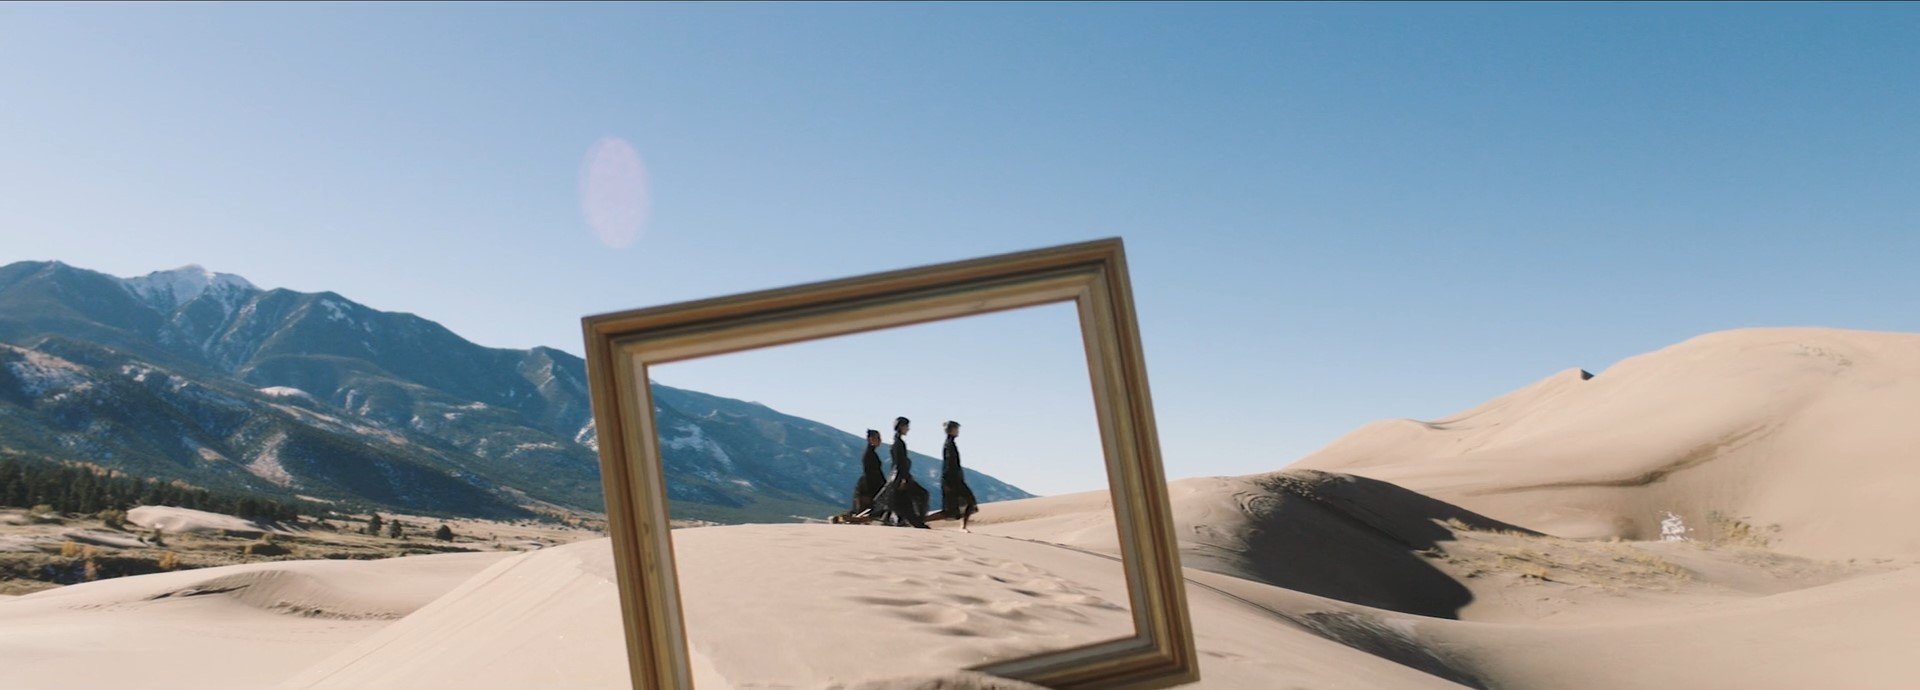 large wooden photo frame at the middle of the desert with three people walking